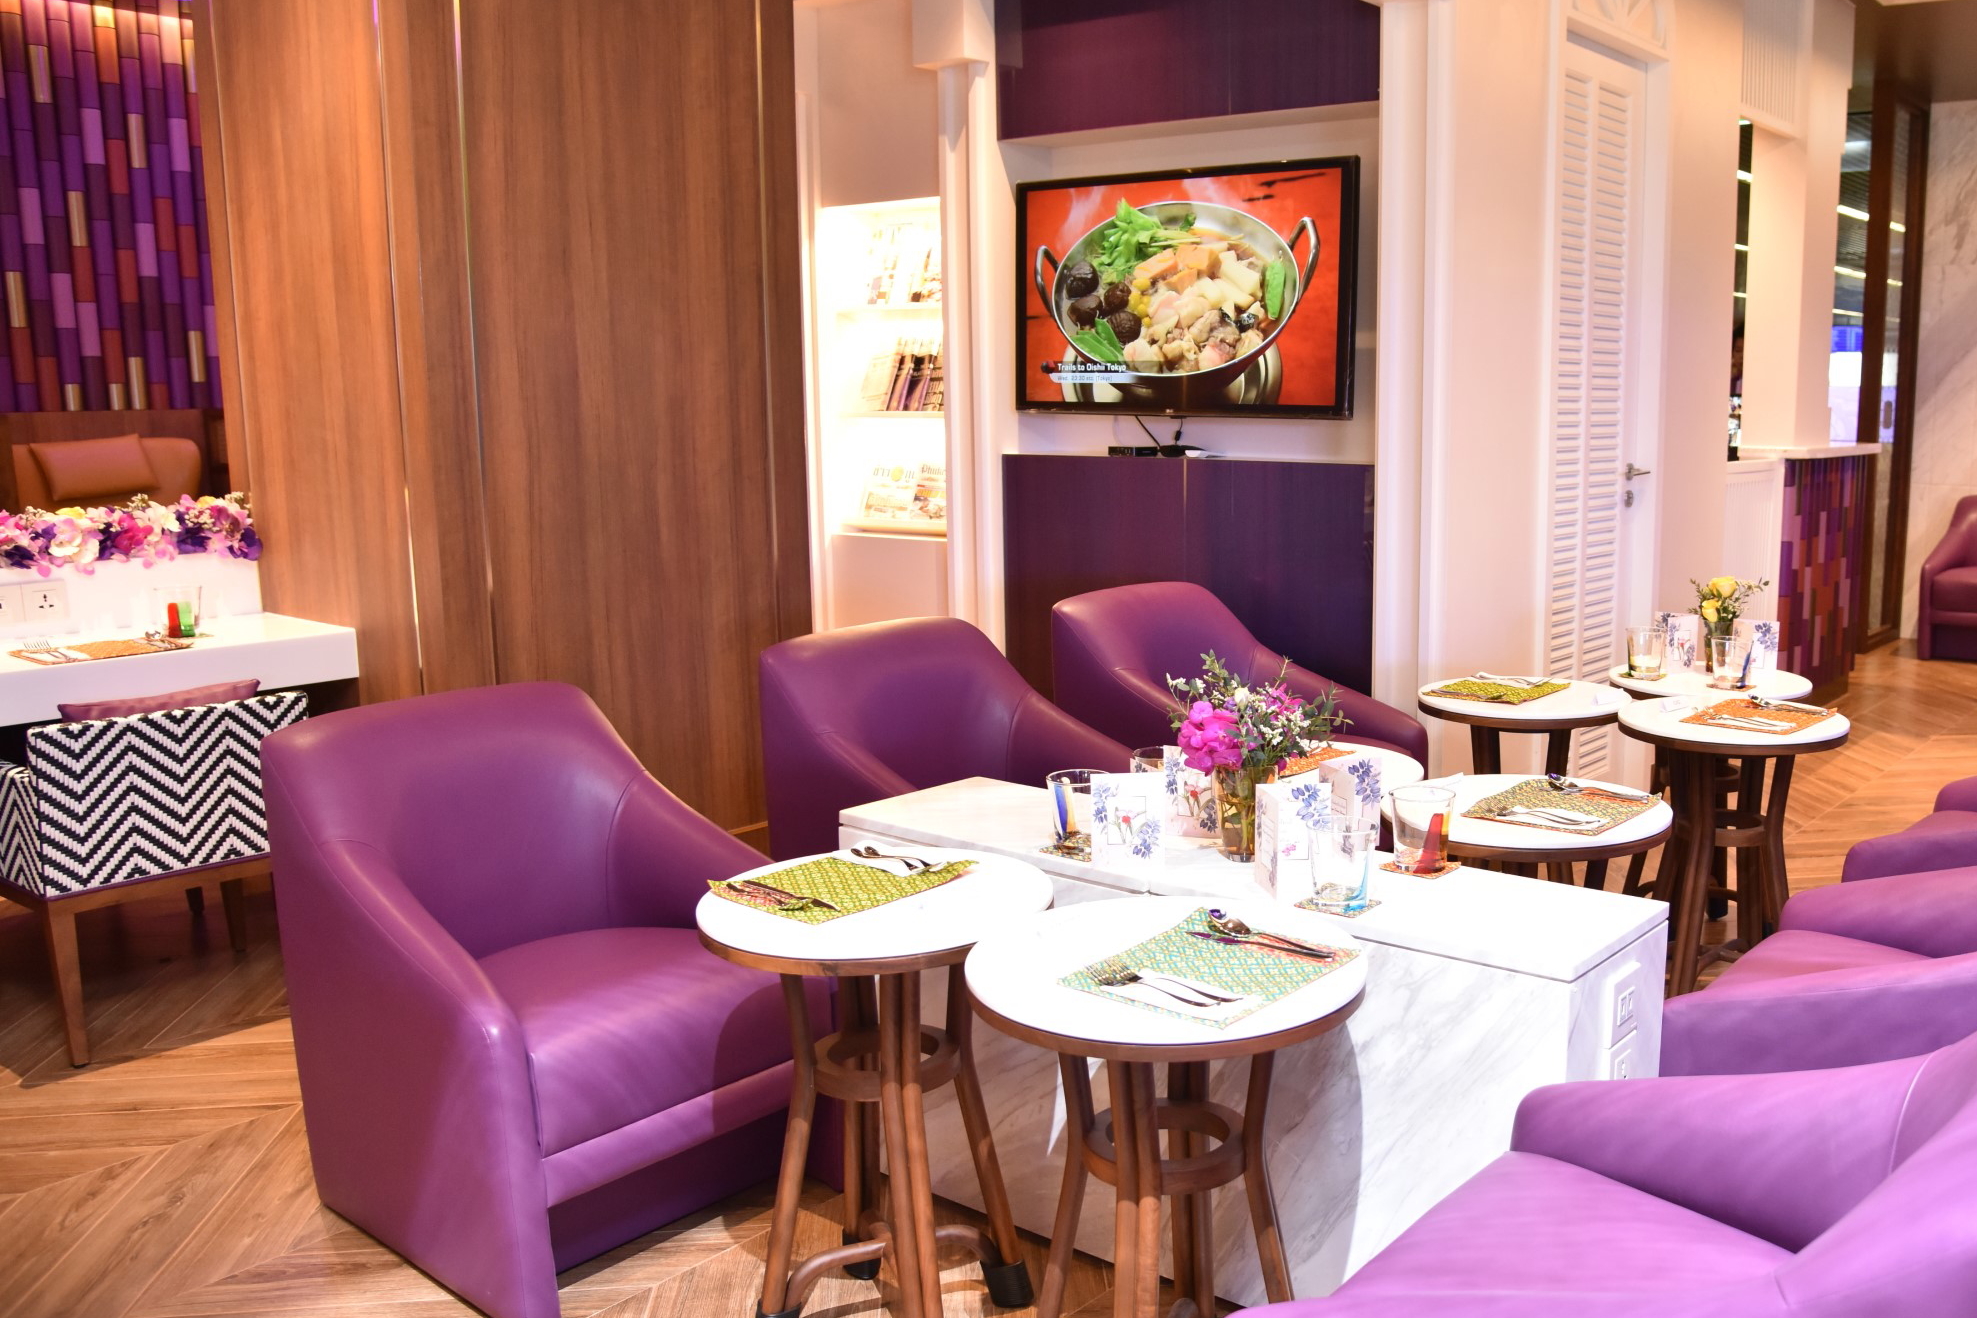 Thai Airways has opened a Royal Orchid Lounge at Phuket International Airport. The new lounge, located on the second floor of the Domestic Passenger Terminal, is open daily from 05:00 - 22:00 for passengers traveling in Thai Airways' Royal Silk Class, Royal Orchid Plus (ROP) Gold cardholders, Thai Smile’s Smile Plus passengers, and Star Alliance Gold cardholders. Click to enlarge.